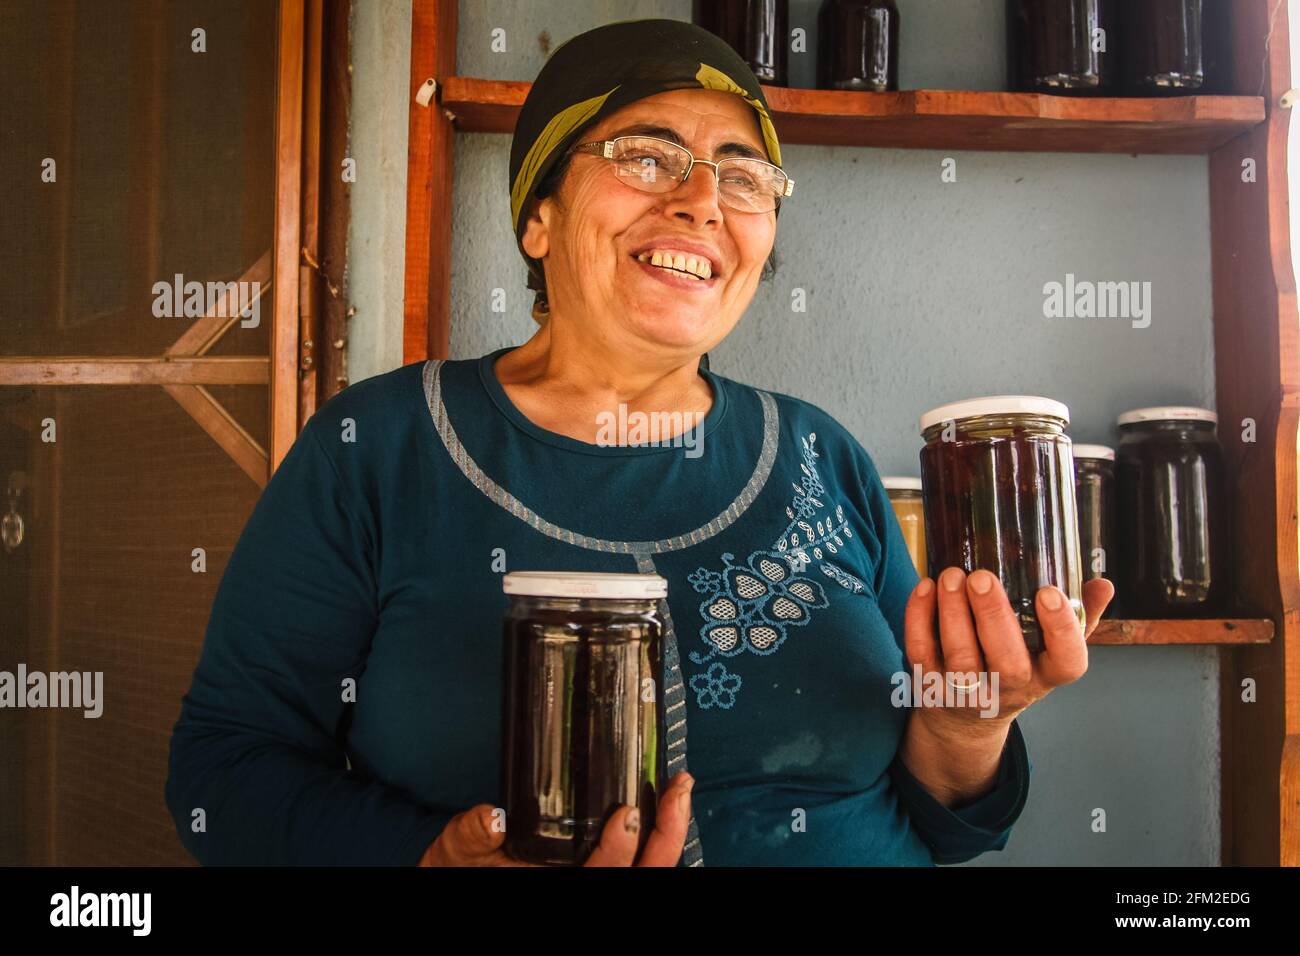 Gokceada, Canakkale - Turkey - May 07 2013: A turkish female farmer holding two jars of jam in her hands and smiling, Tepekoy Stock Photo